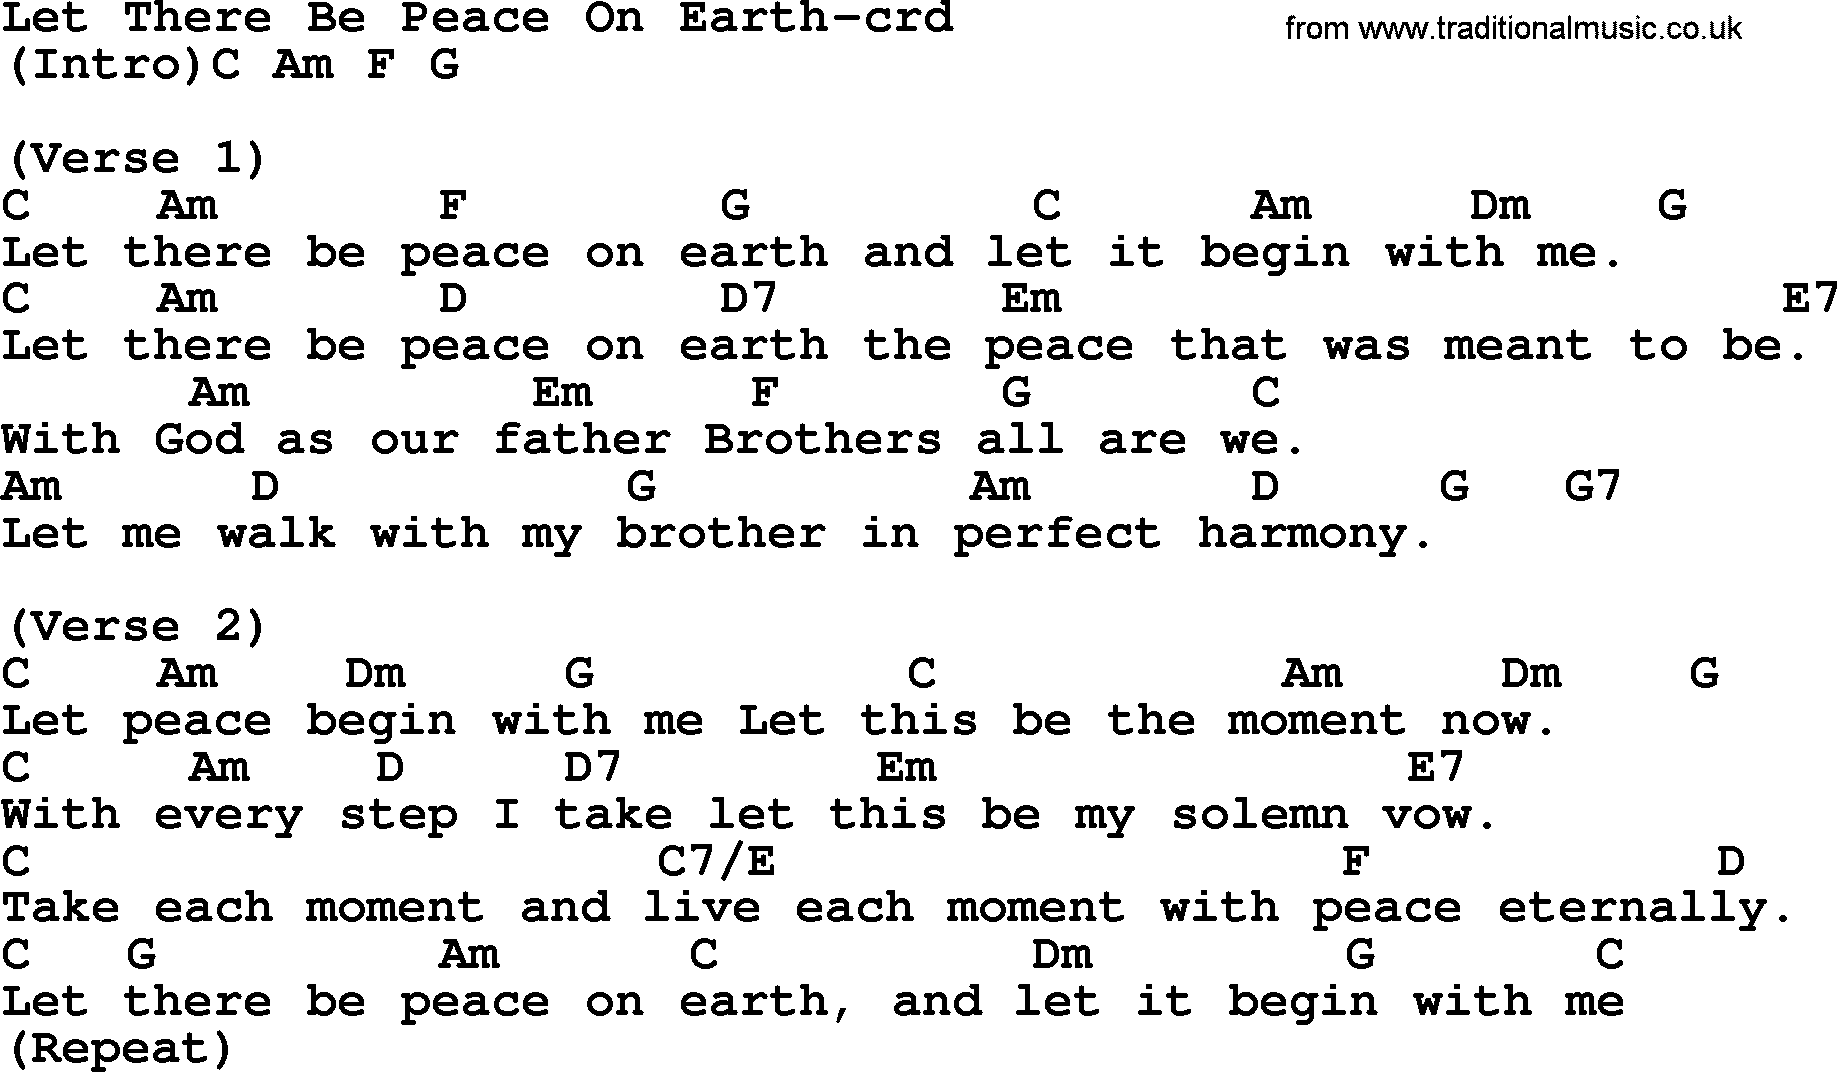 Top 500 Hymn Let There Be Peace On Earth lyrics, chords and PDF